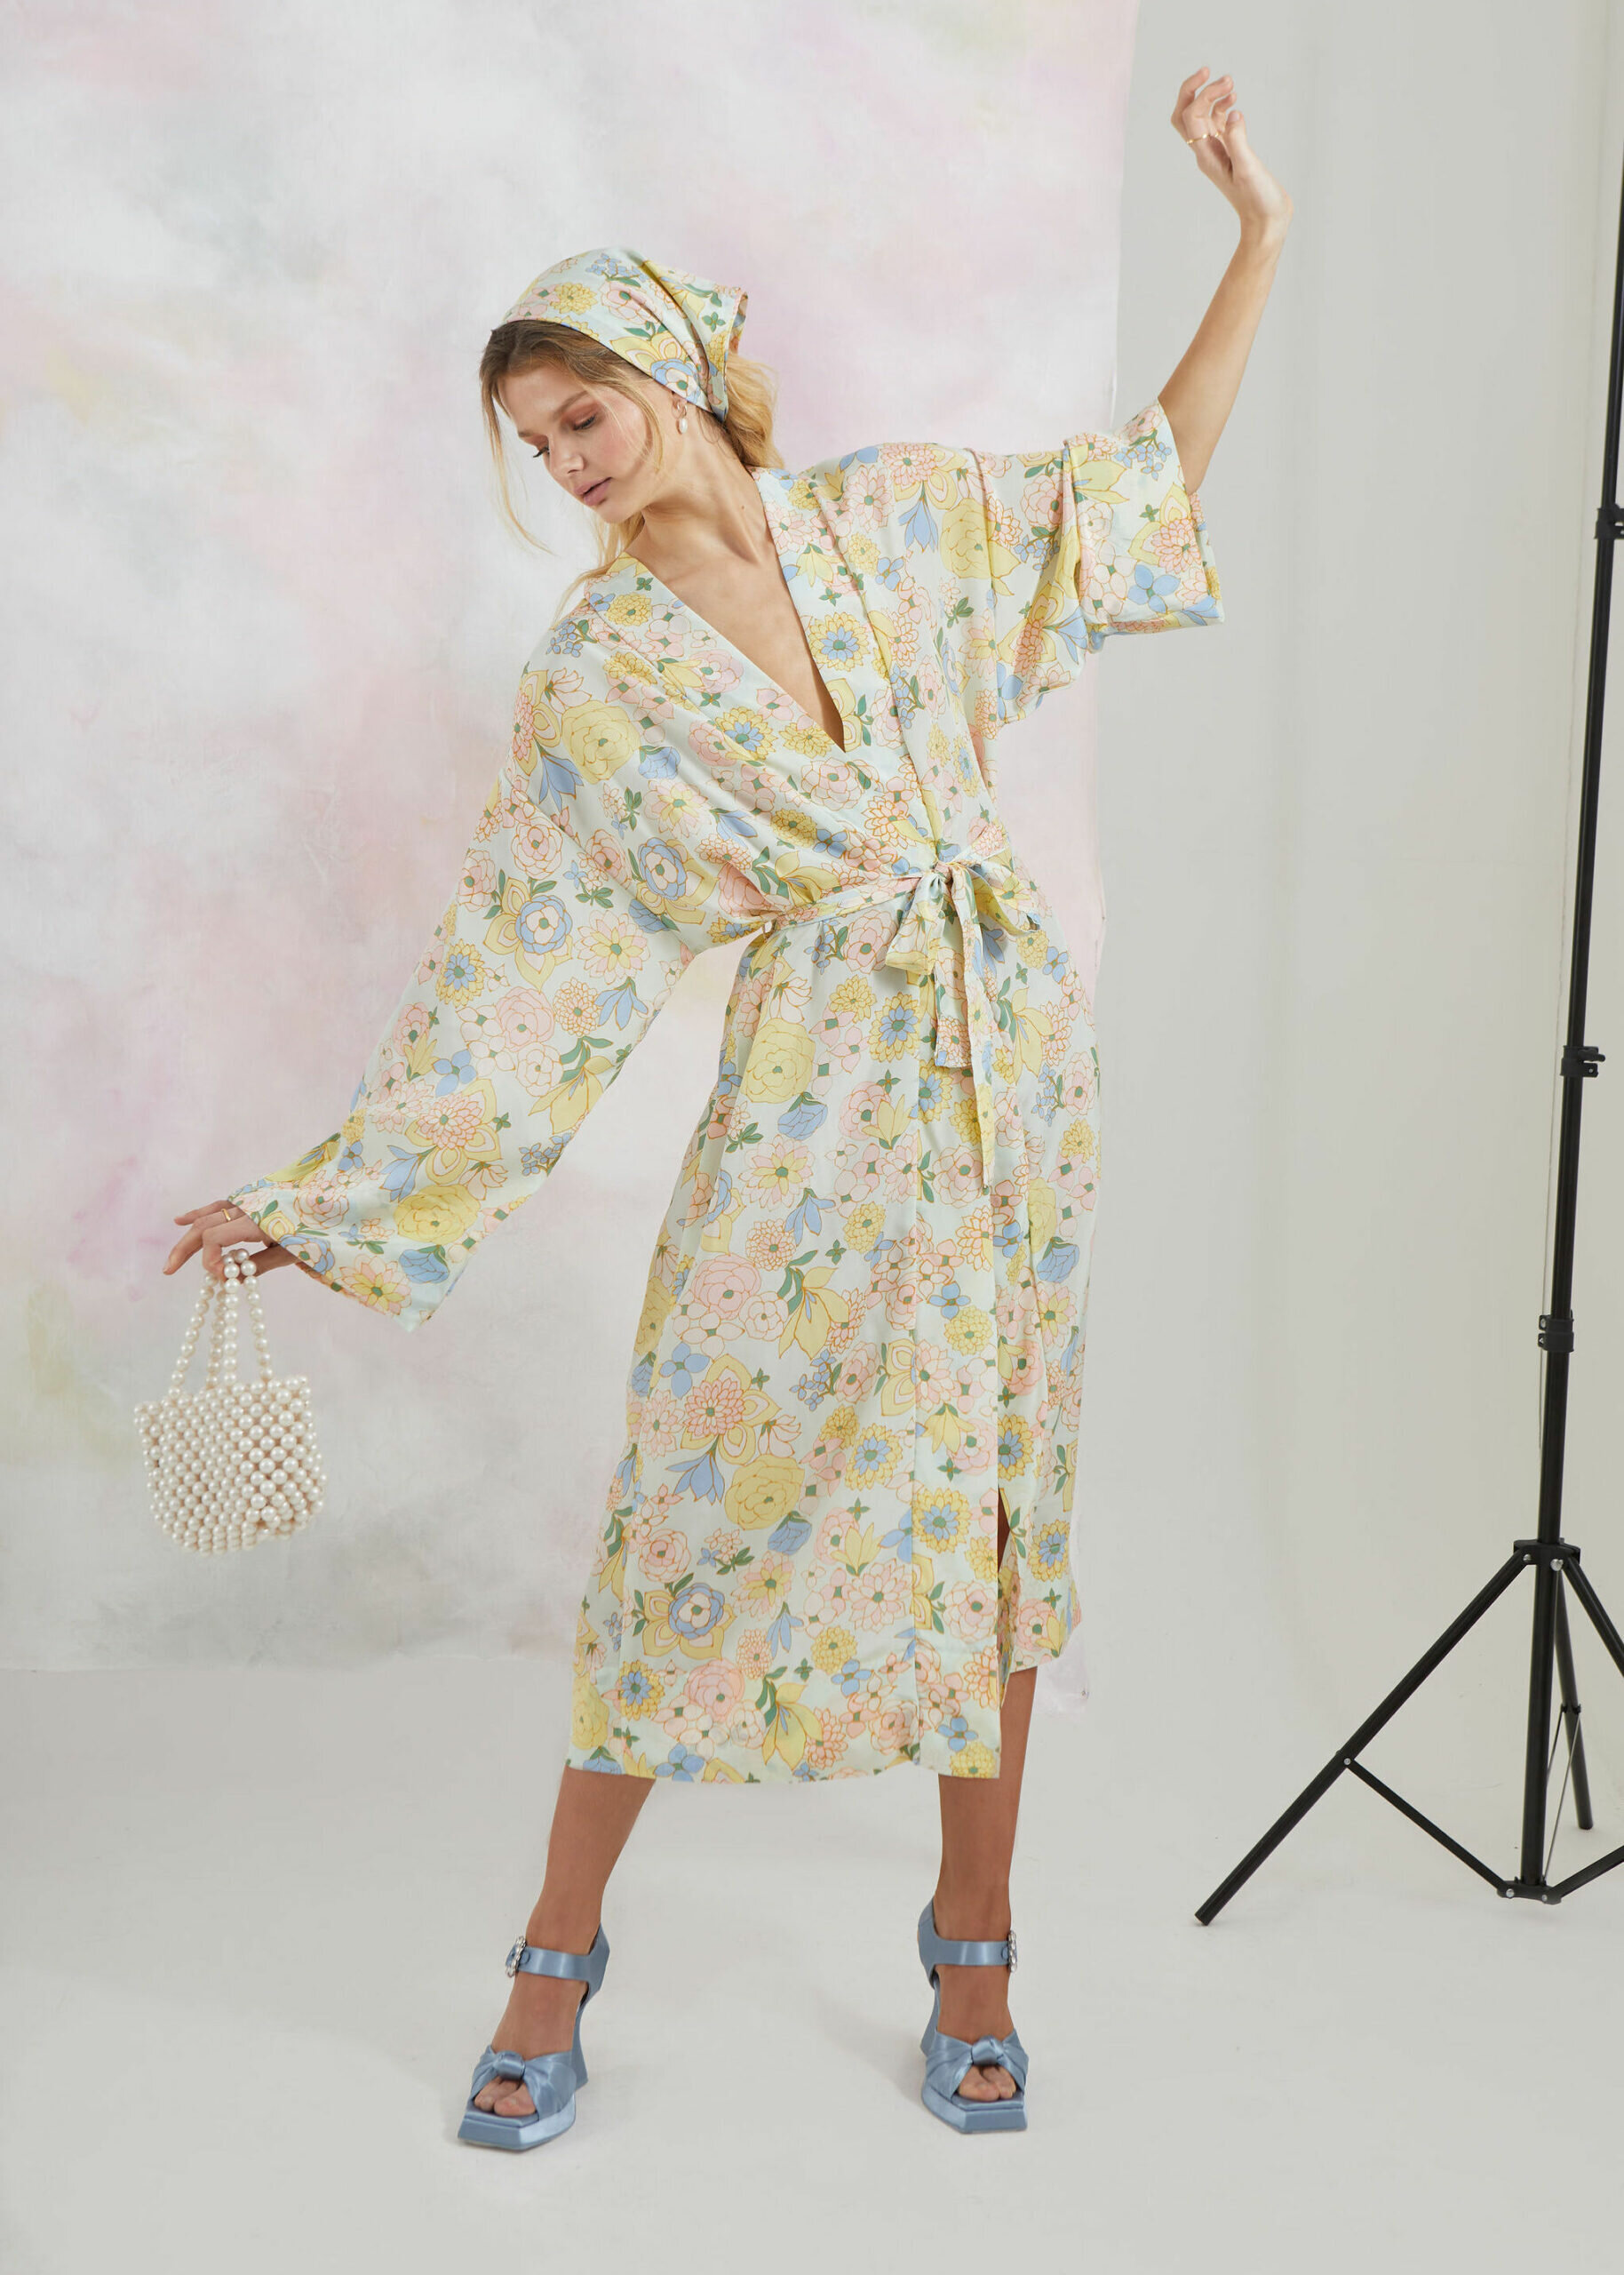 16/20Olivia Rose The LabelSilk handmade robe dress, available at Olivia Rose The Label.